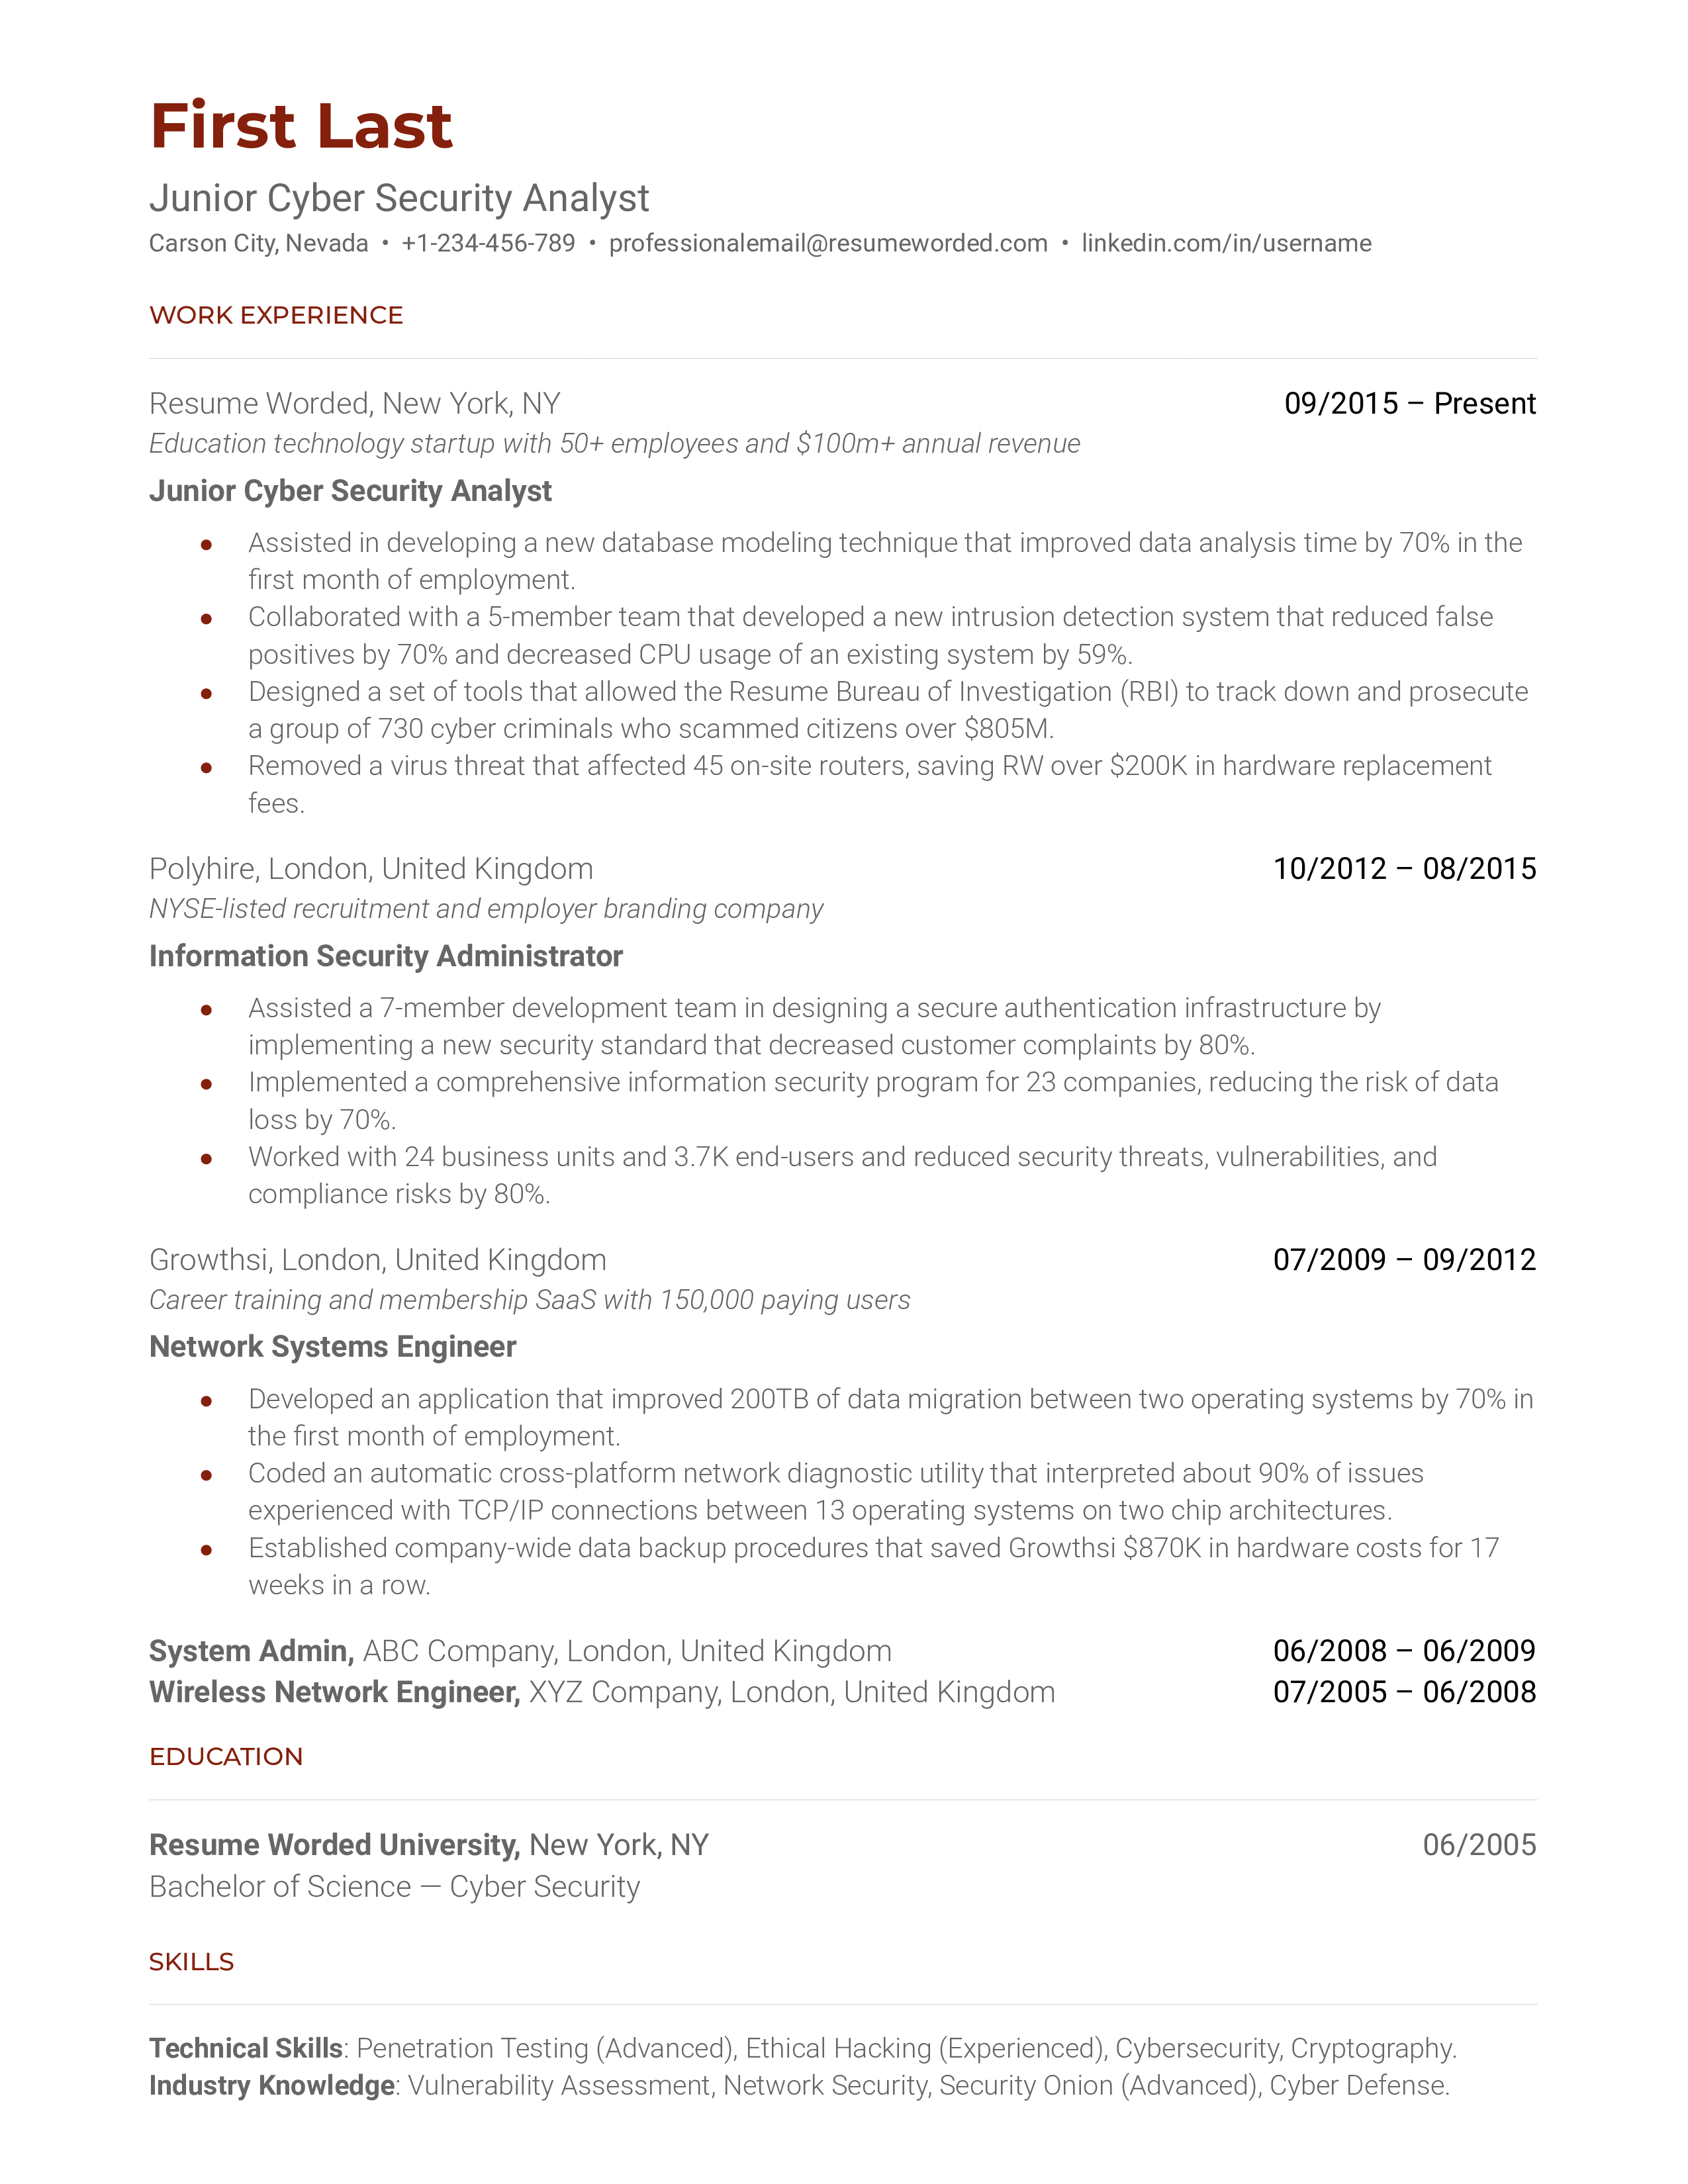 A CV of a Junior Cyber Security Analyst showcasing their practical experience and familiarity with modern security tools.